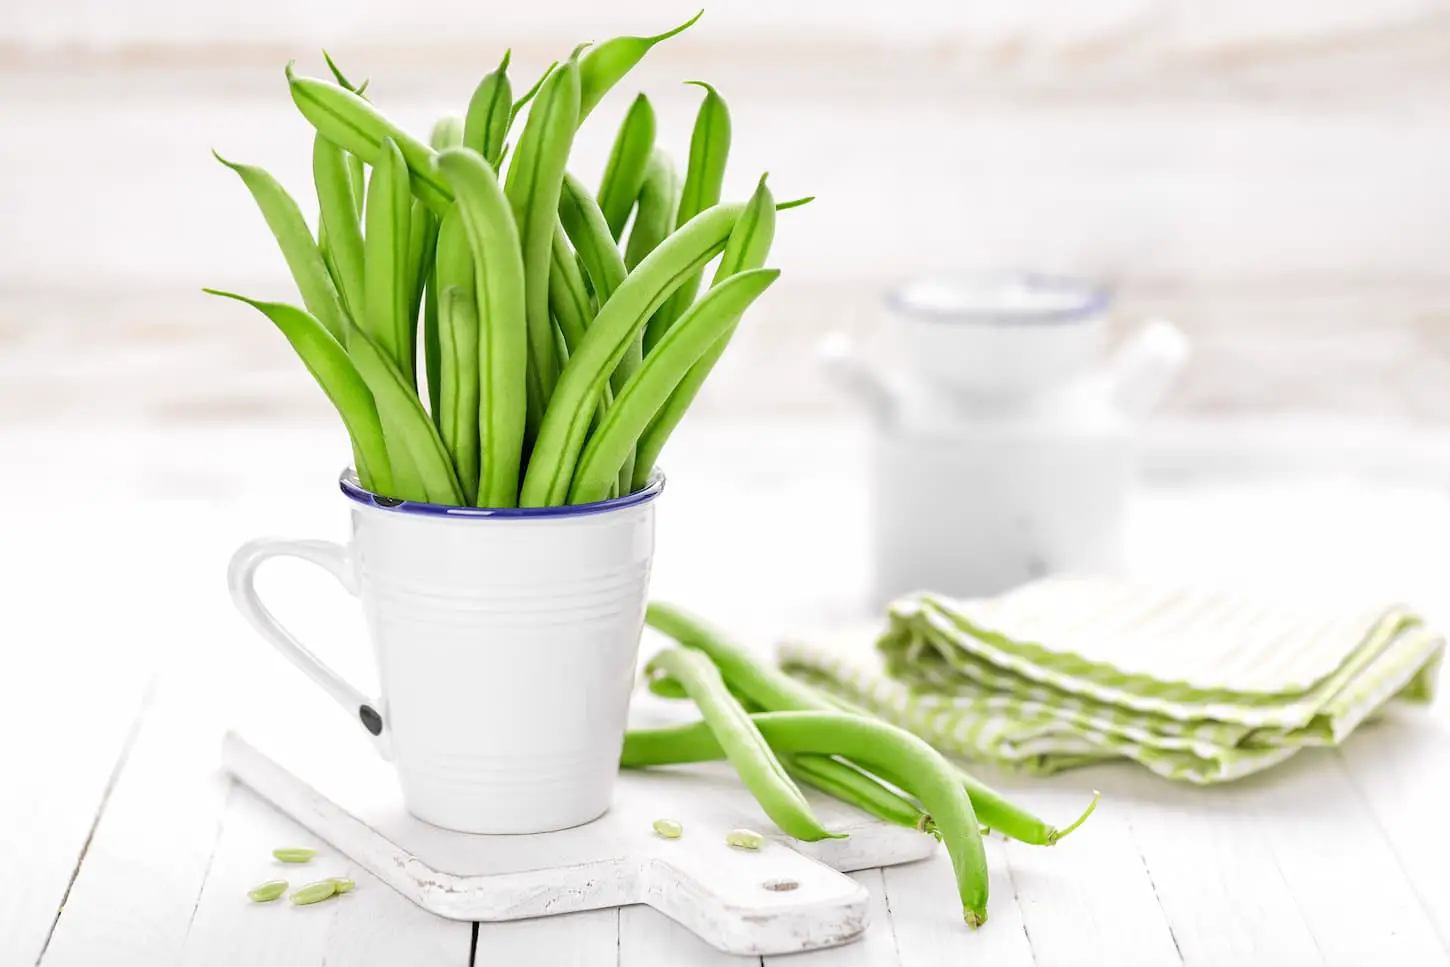 An image of green beans in a white mug on a white background.